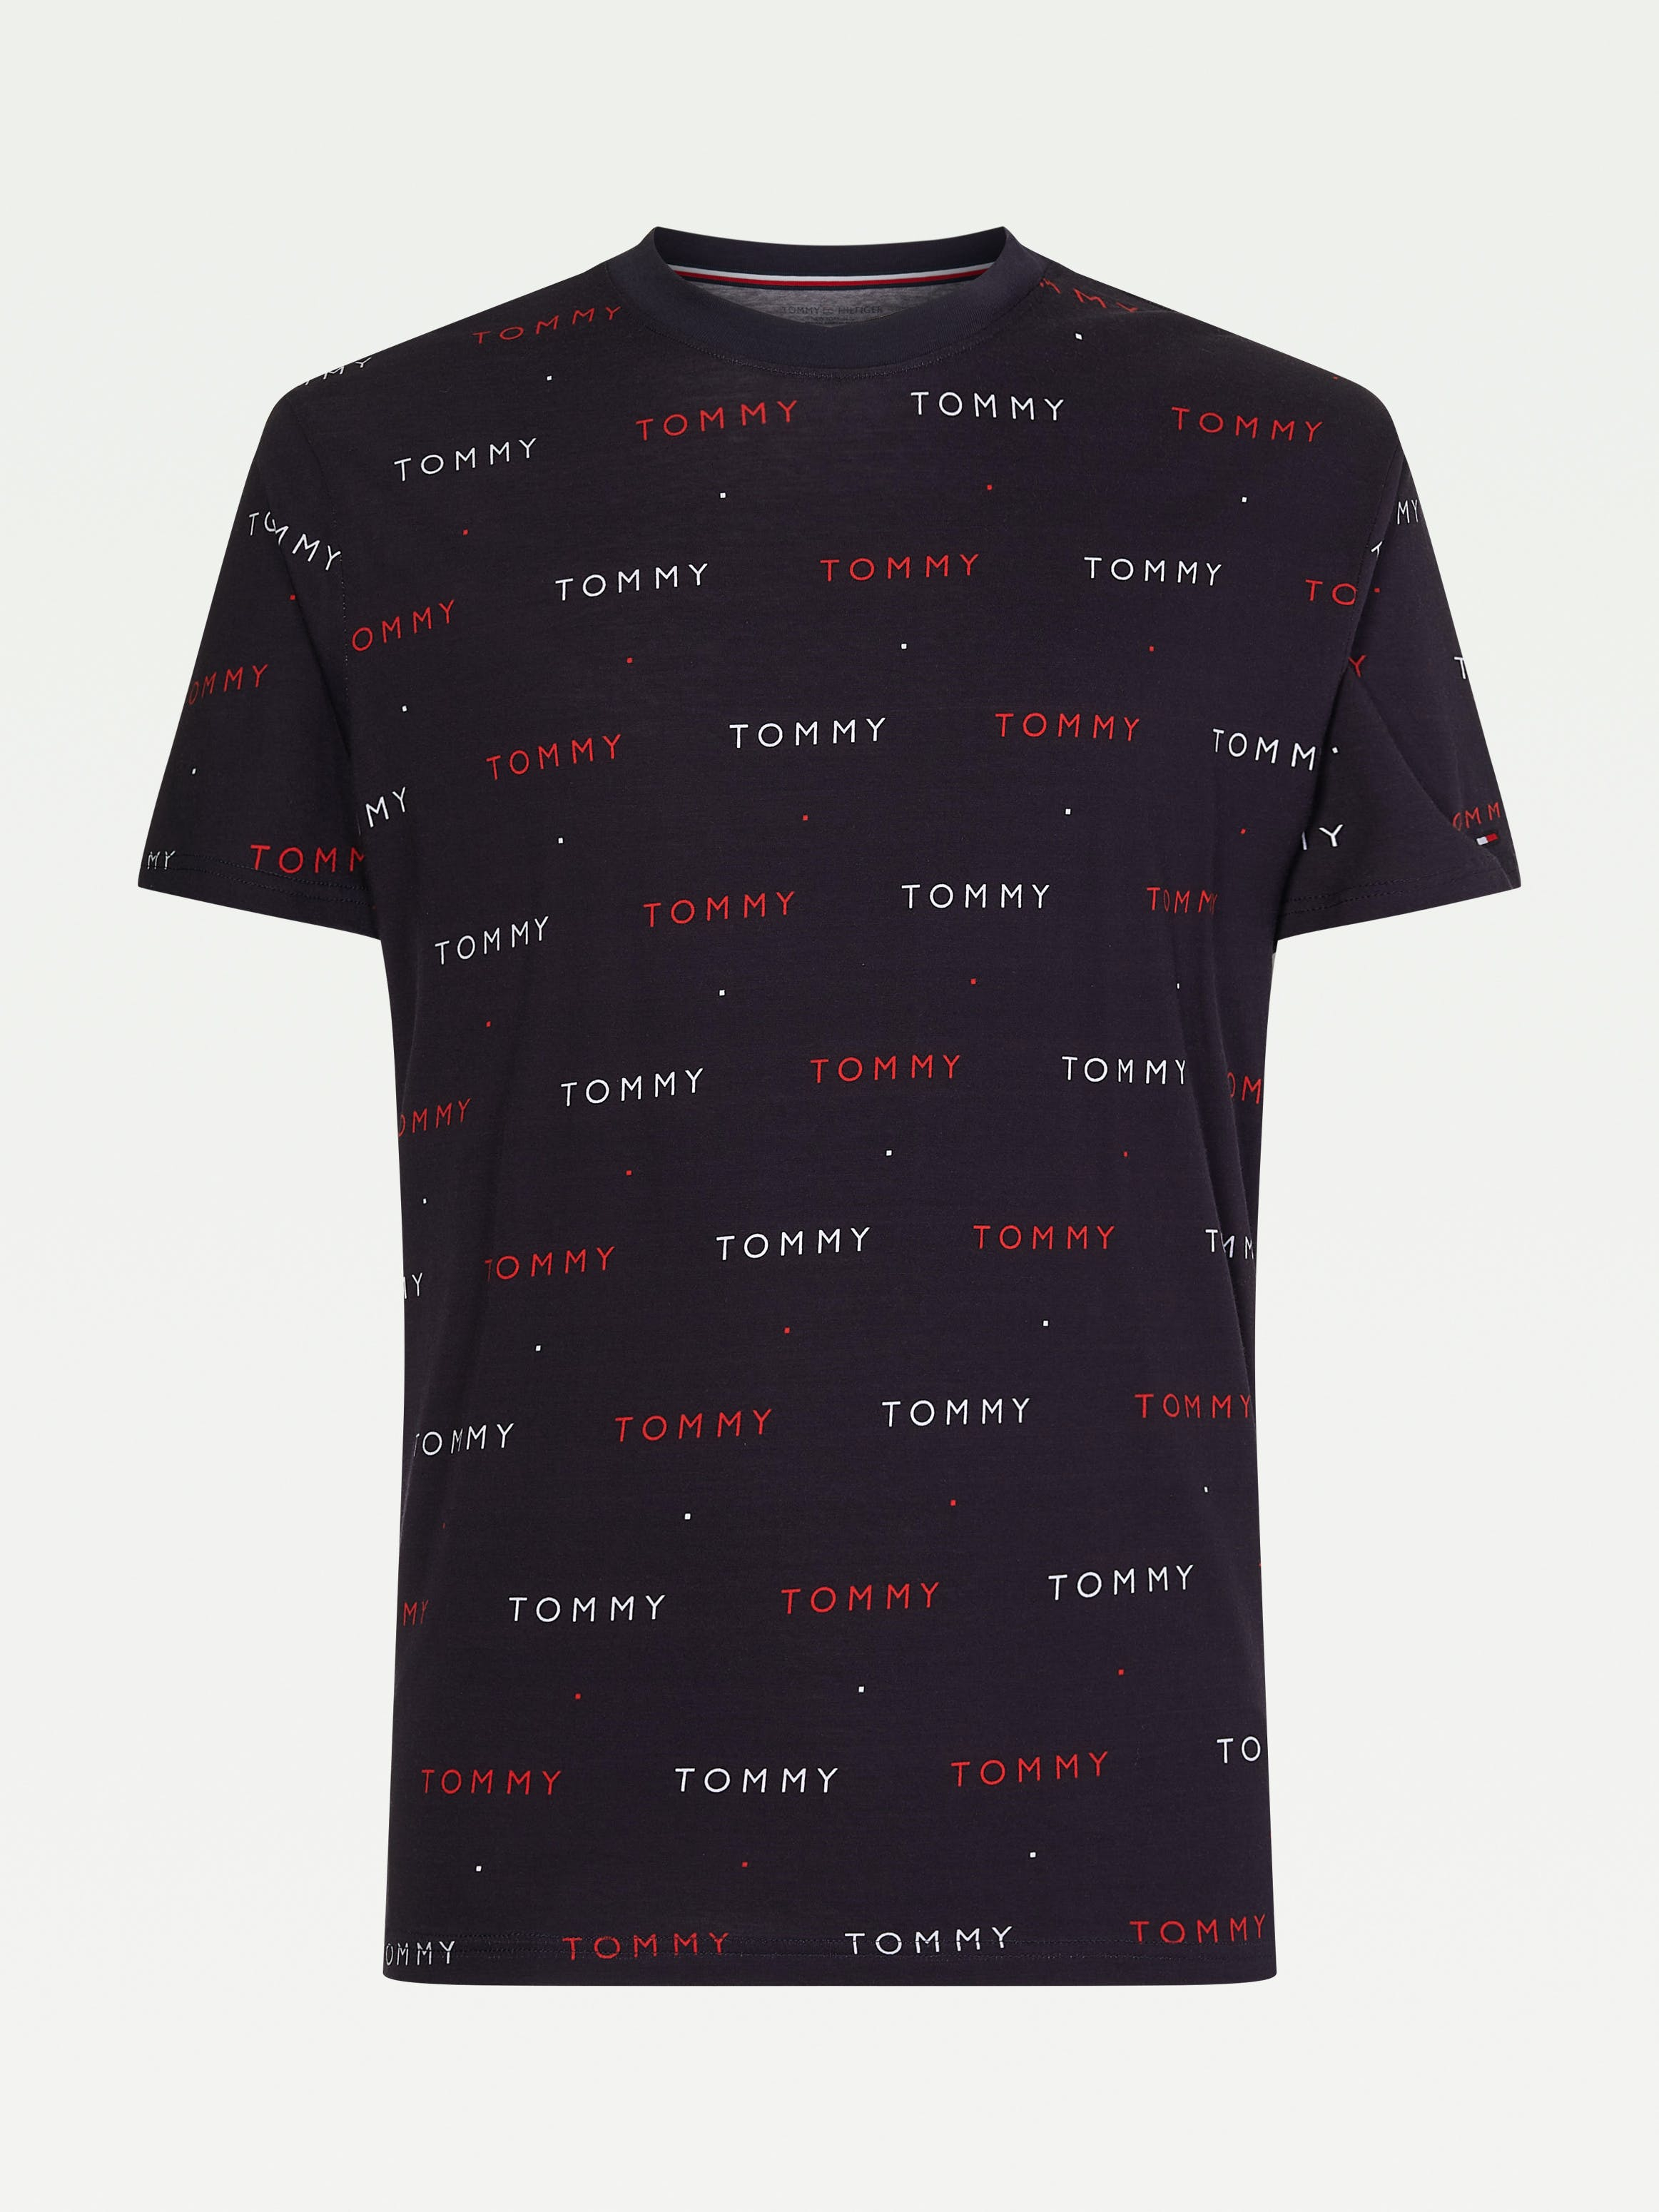 Men's T-shirt Tommy Hilfiger ALL-OVER EMBROIDERY Navy